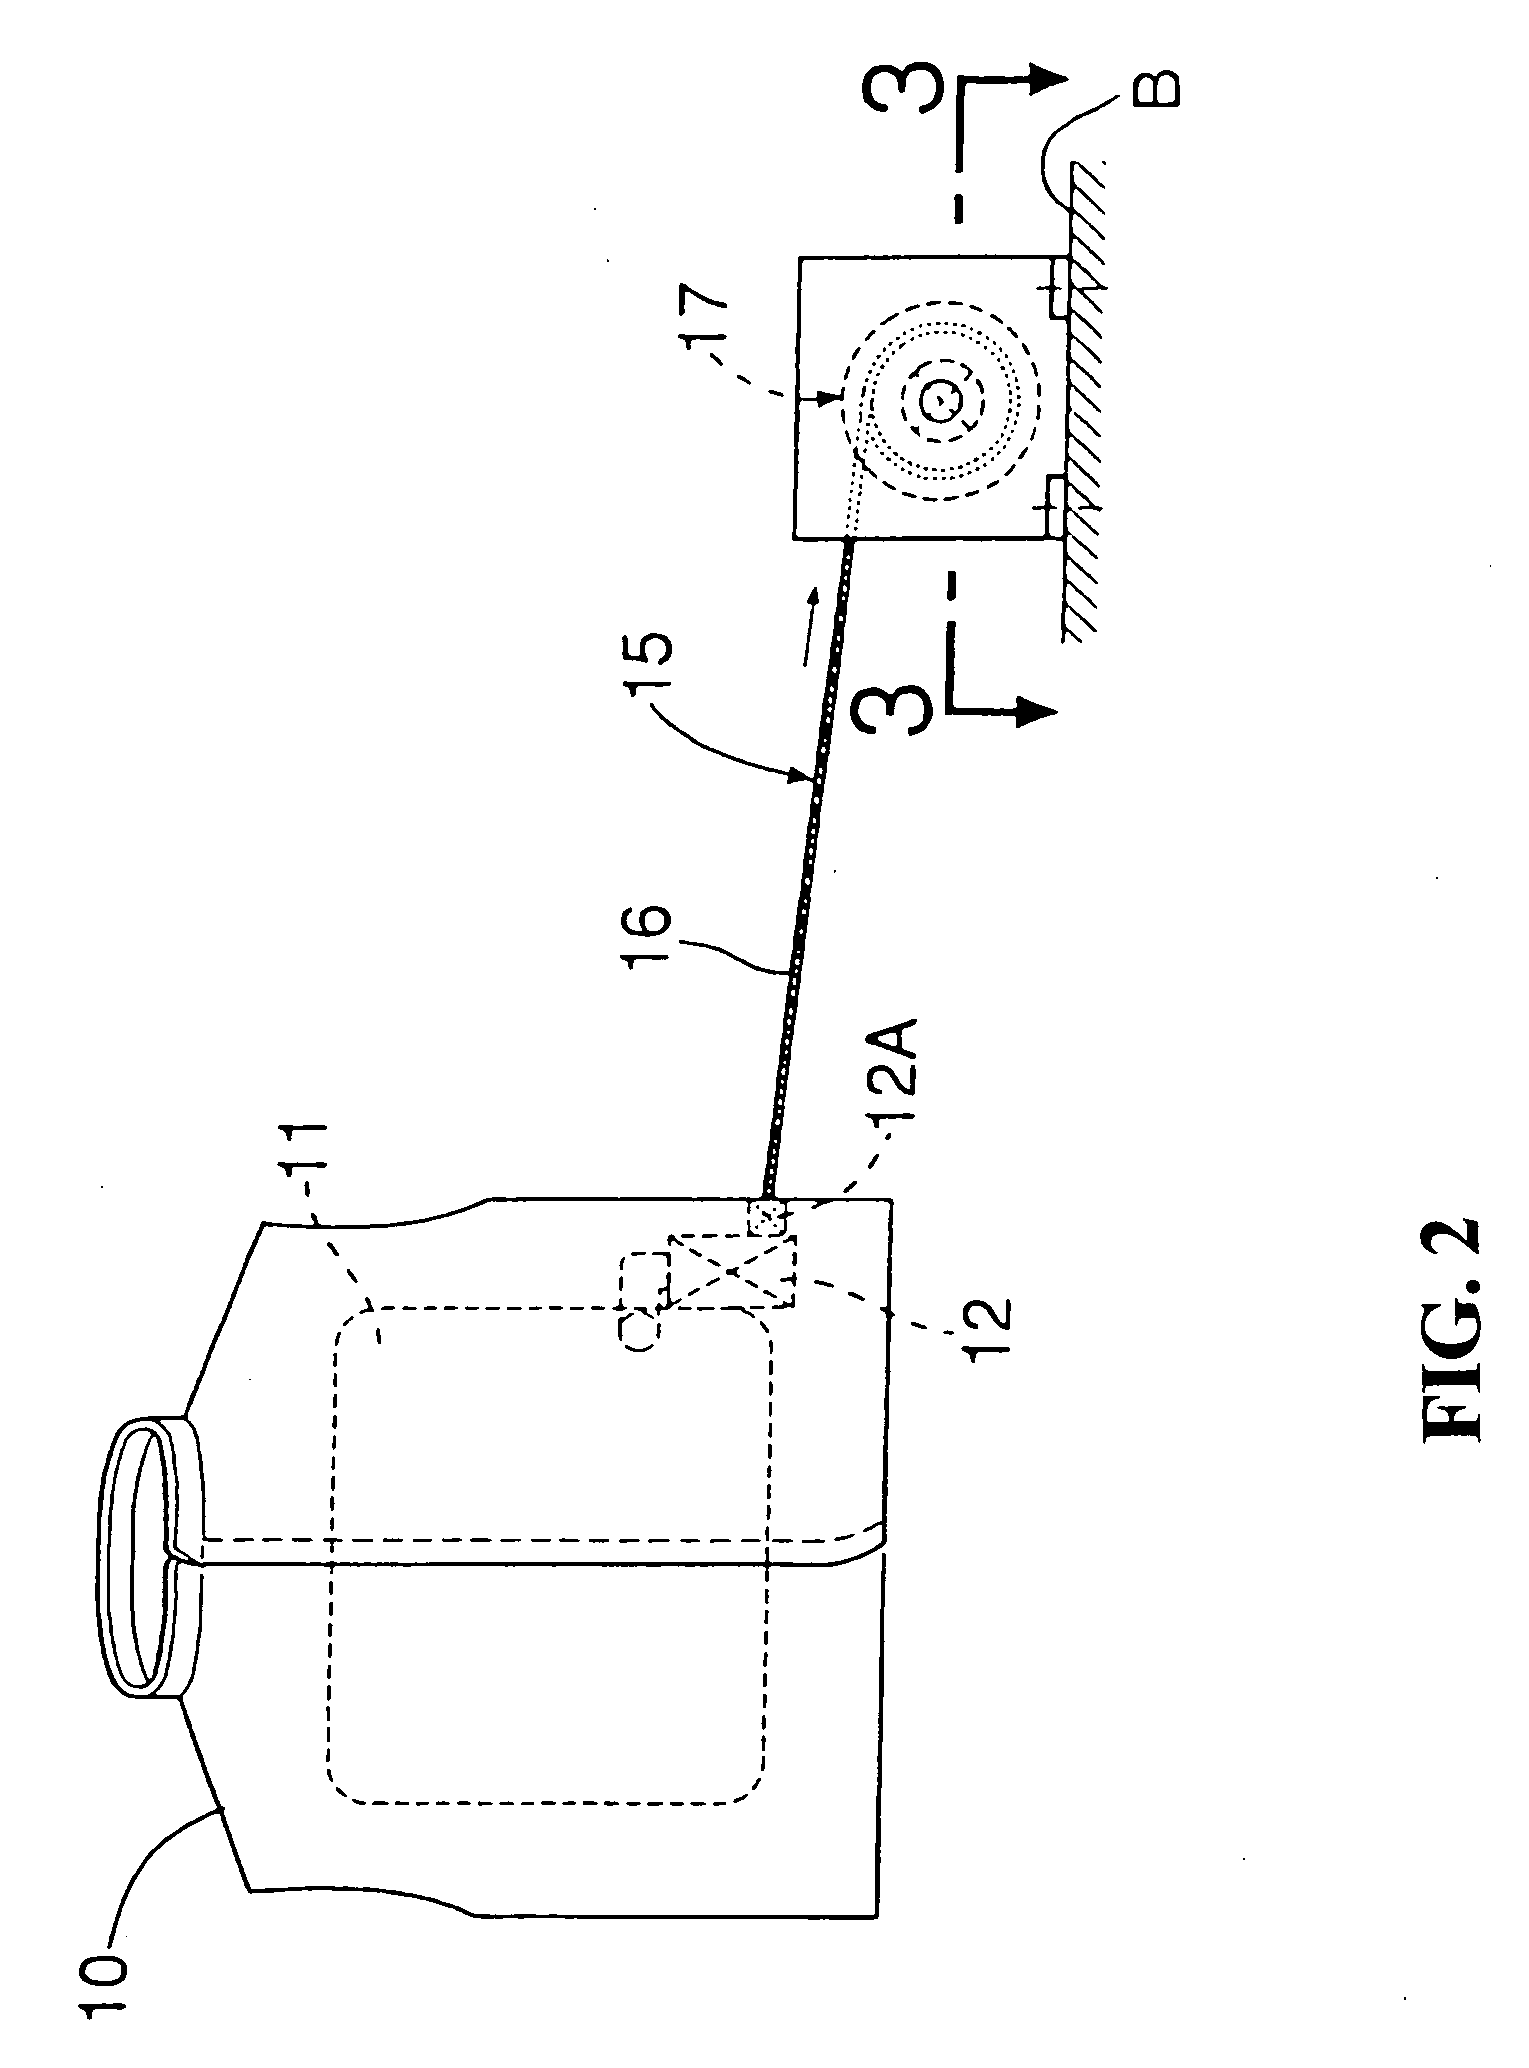 Rider separation detecting device